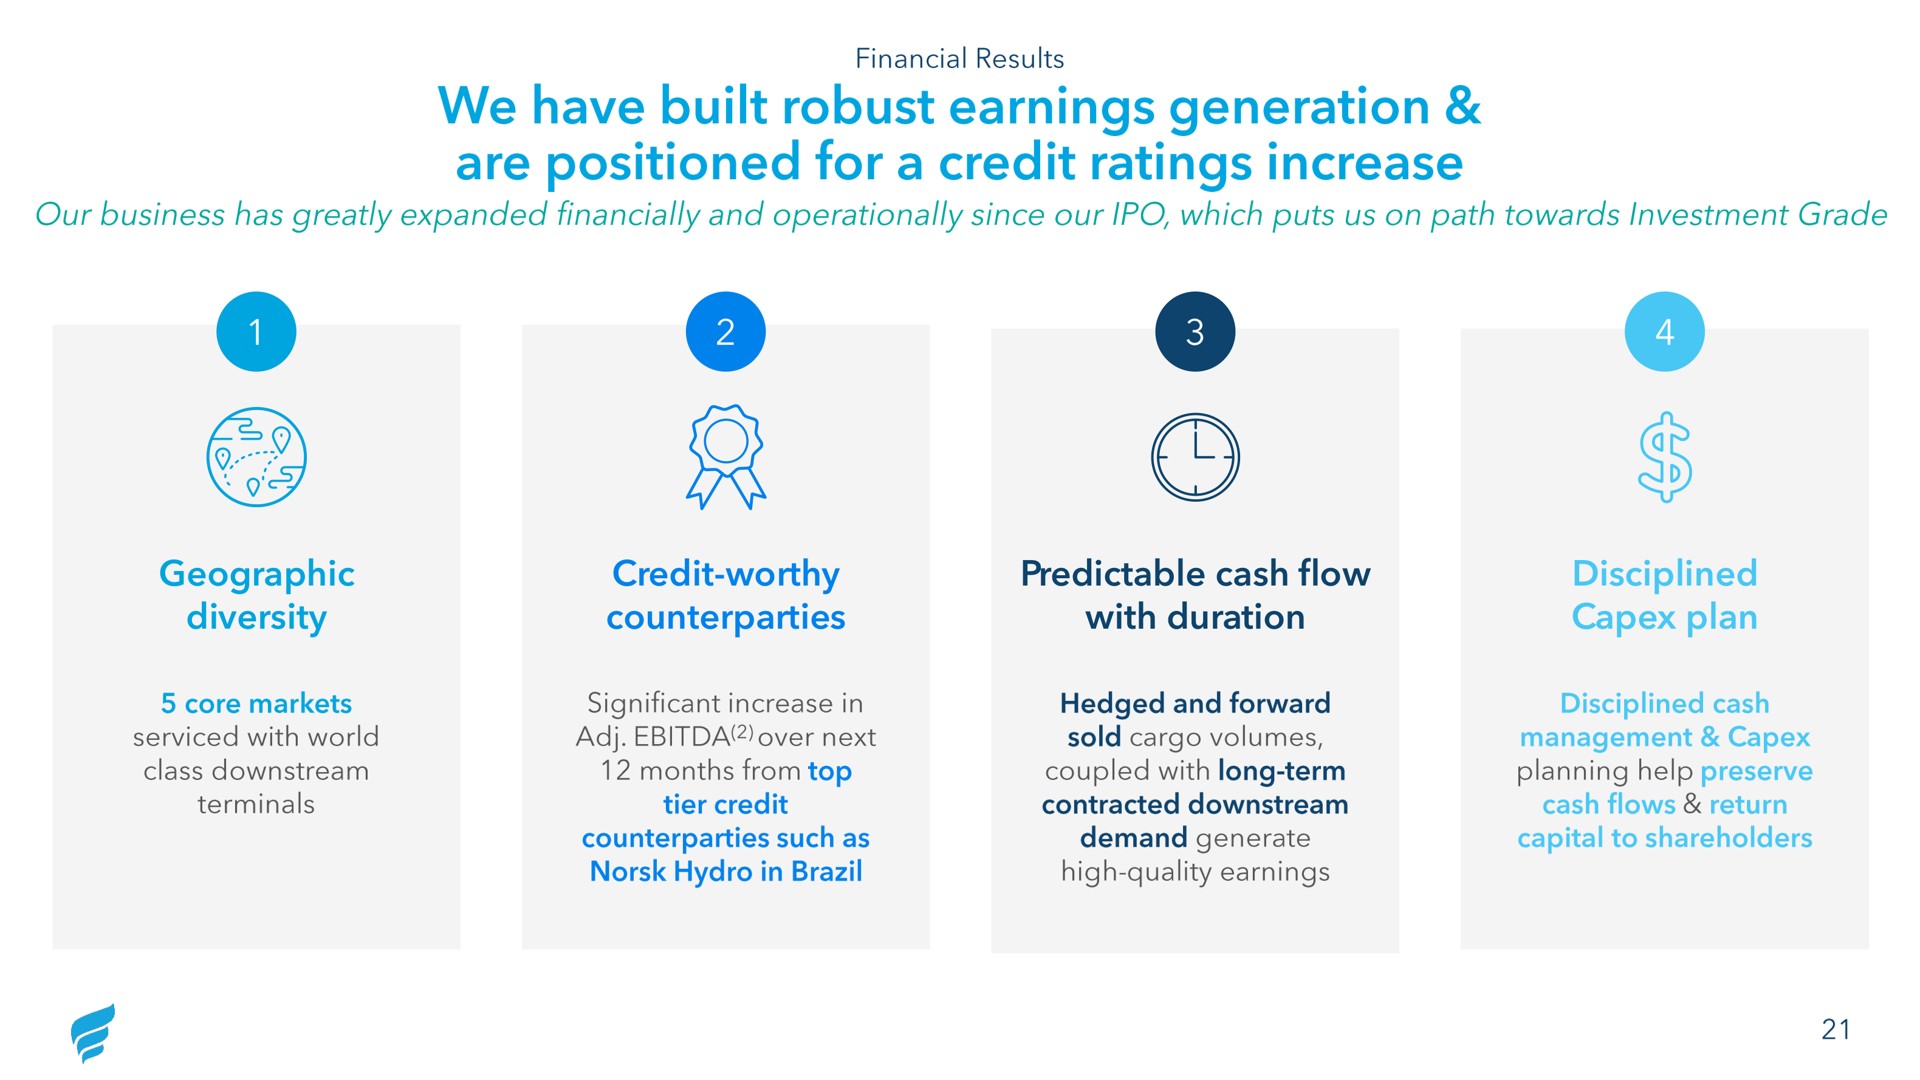 geographic diversity credit worthy predictable cash flow with duration disciplined plan we have built robust earnings generation are positioned for a credit ratings increase | NewFortress Energy